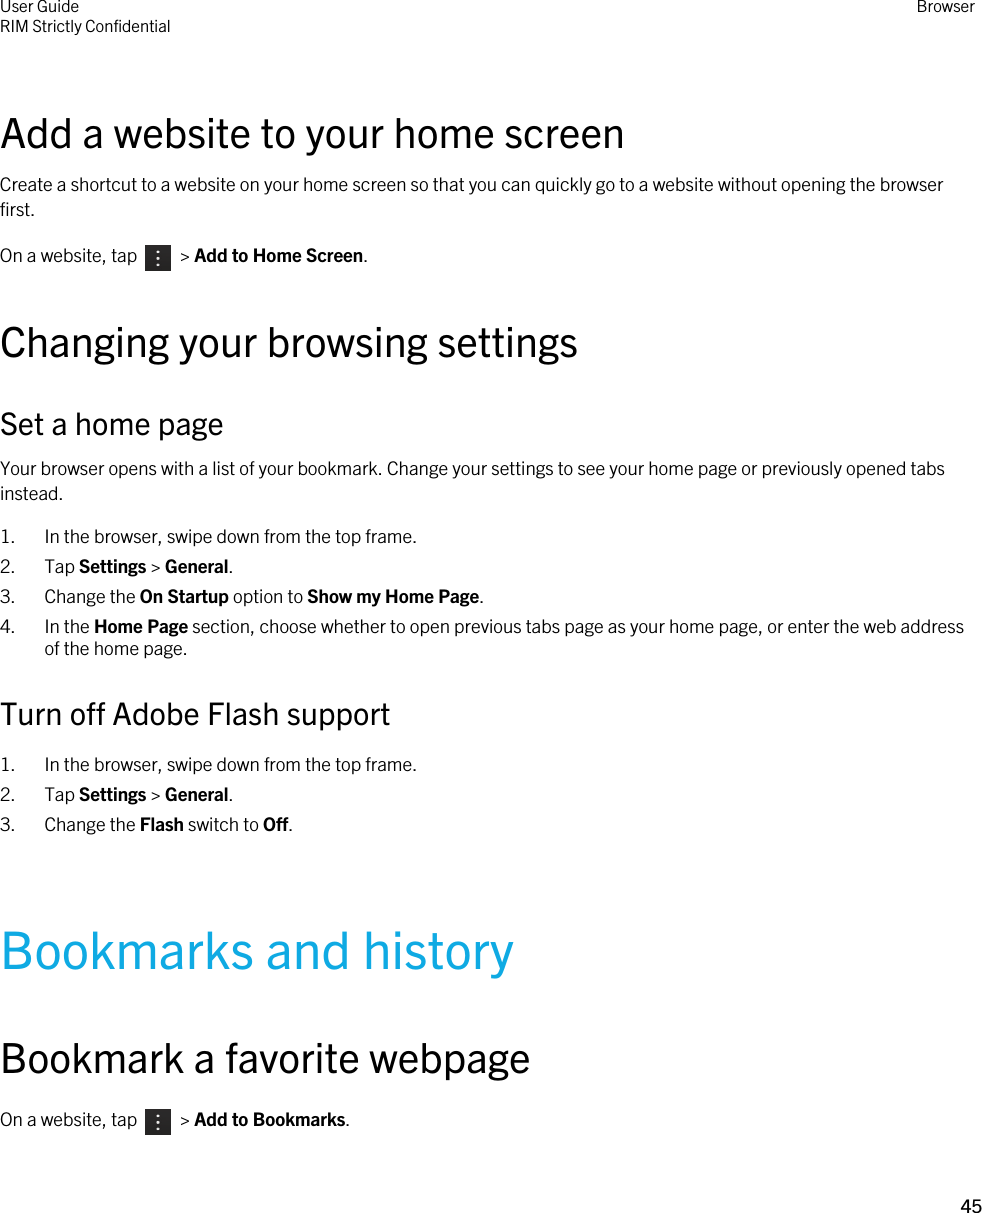 Add a website to your home screenCreate a shortcut to a website on your home screen so that you can quickly go to a website without opening the browser first.On a website, tap    &gt; Add to Home Screen.Changing your browsing settingsSet a home pageYour browser opens with a list of your bookmark. Change your settings to see your home page or previously opened tabs instead.1. In the browser, swipe down from the top frame.2. Tap Settings &gt; General.3. Change the On Startup option to Show my Home Page.4. In the Home Page section, choose whether to open previous tabs page as your home page, or enter the web address of the home page.Turn off Adobe Flash support1. In the browser, swipe down from the top frame.2. Tap Settings &gt; General.3. Change the Flash switch to Off.Bookmarks and historyBookmark a favorite webpageOn a website, tap    &gt; Add to Bookmarks.User GuideRIM Strictly Confidential Browser45 